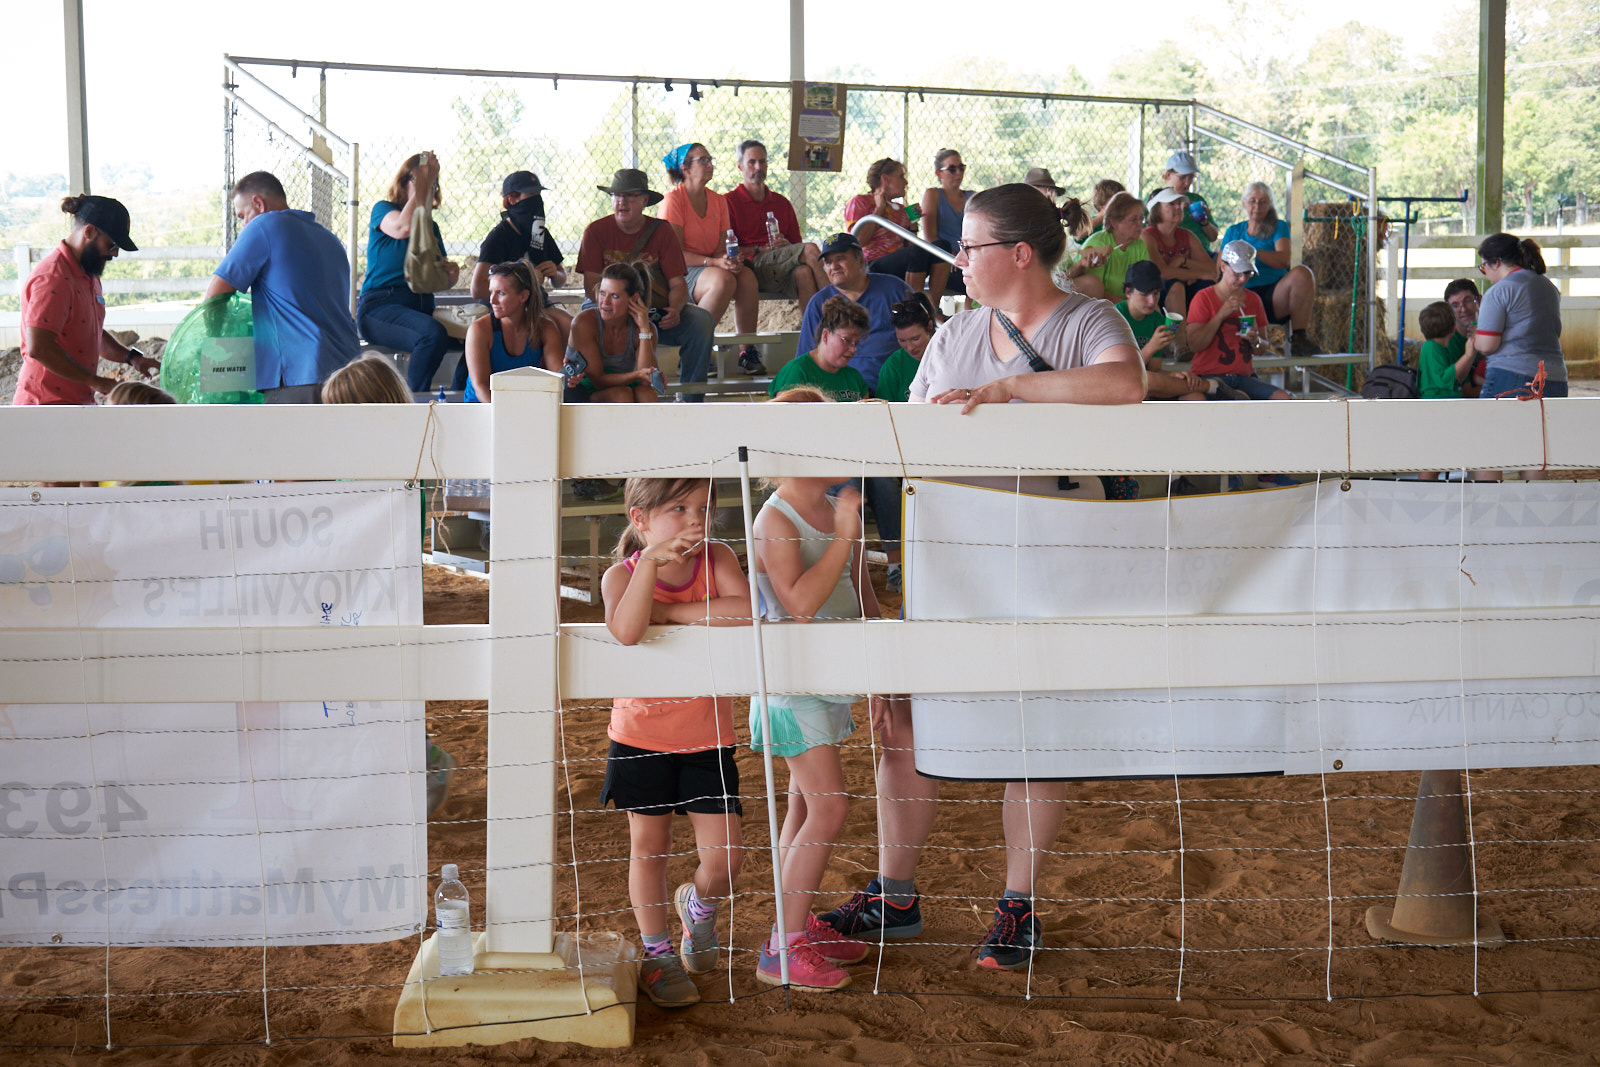 Run with the goats event photography Knoxville and SHANGRI-LA THERAPEUTIC ACADEMY OF RIDING and S